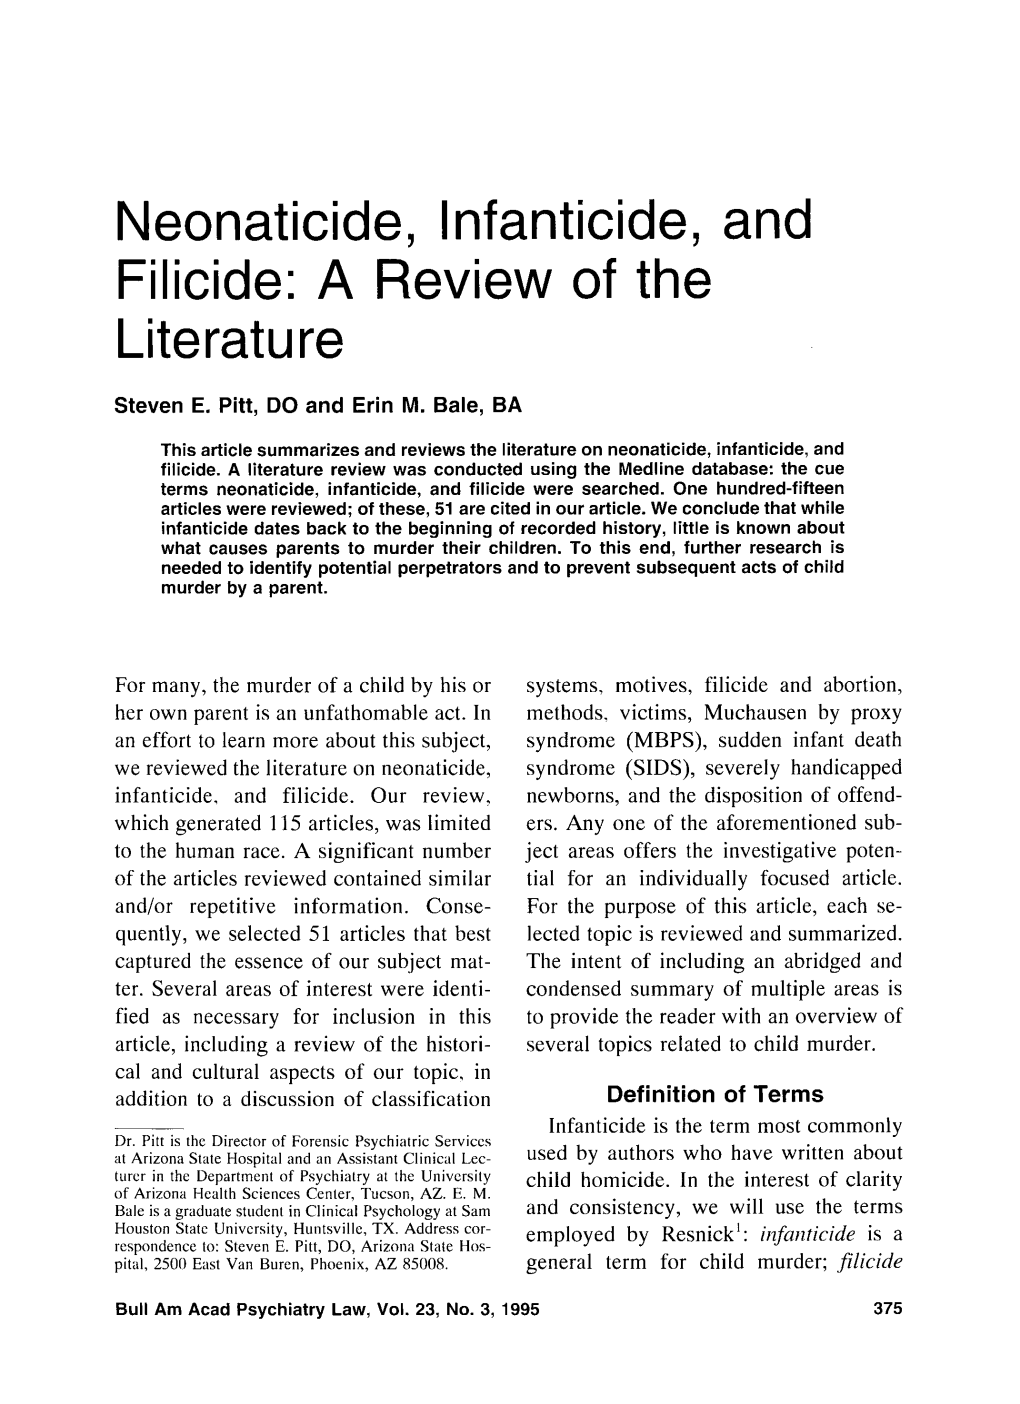 Neonaticide, Infanticide, and Filicide: a Review of the Literature